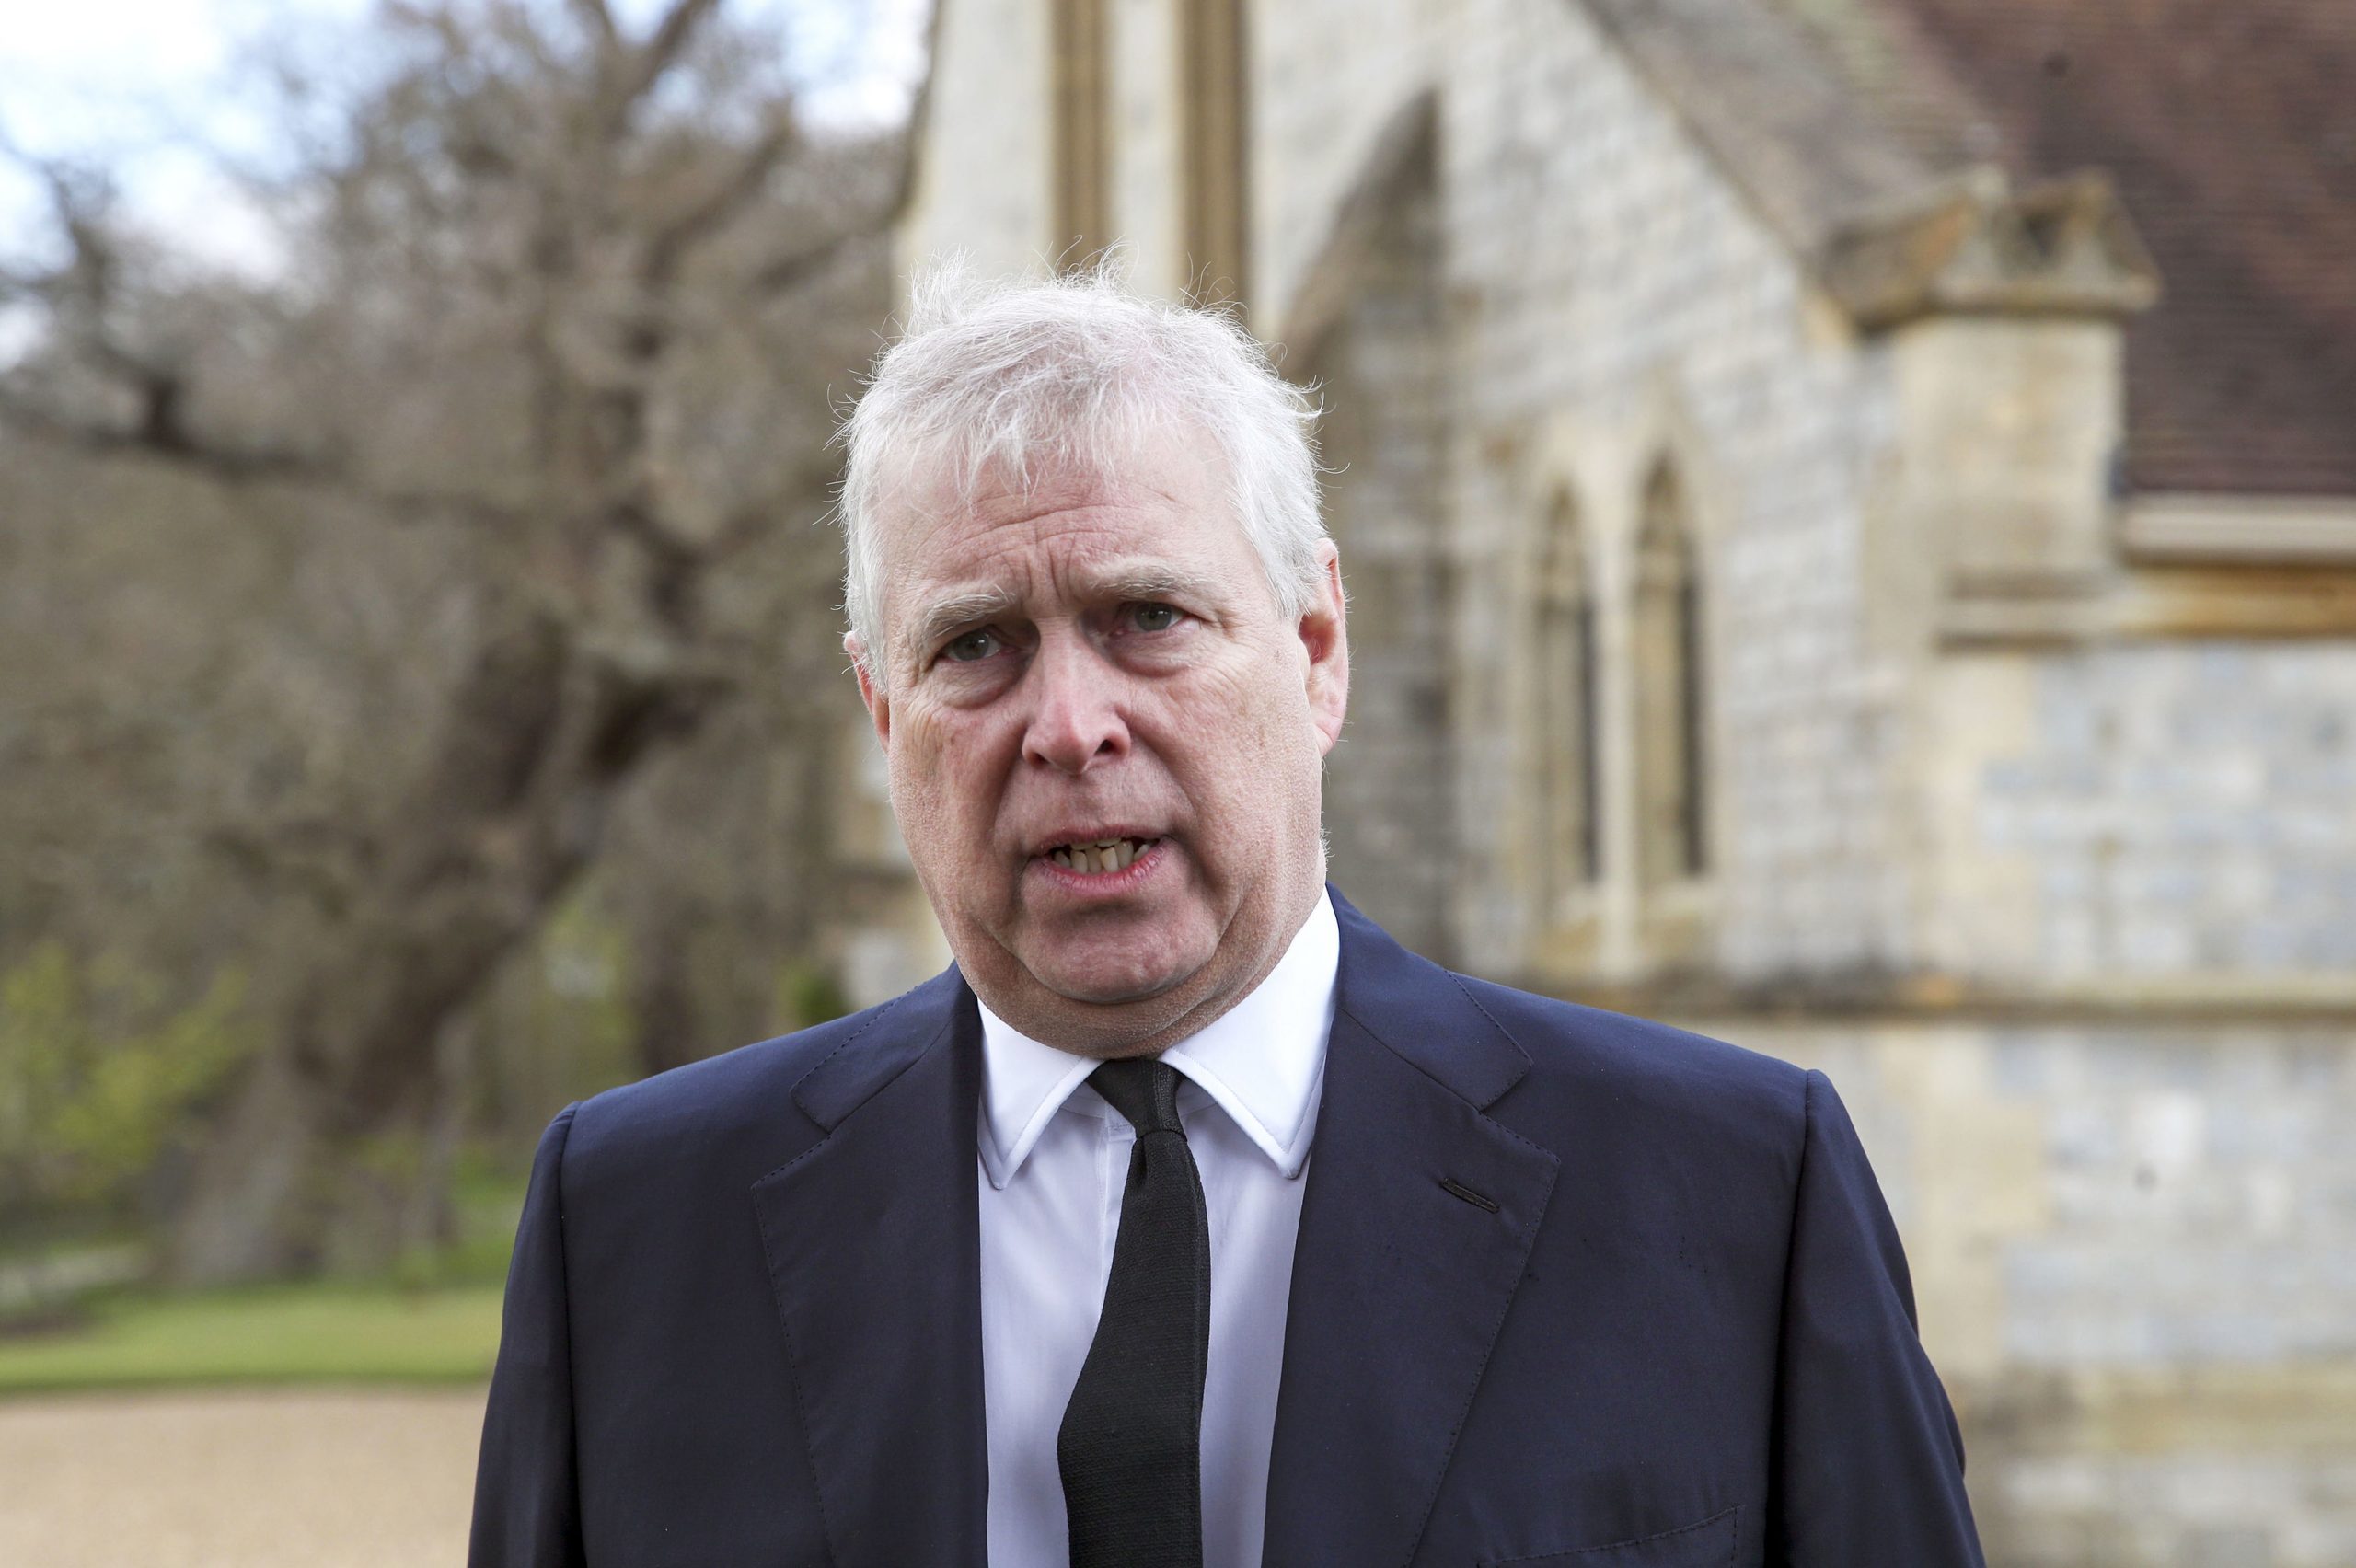 Prince Andrew’s social media accounts deleted after being stripped of royal titles